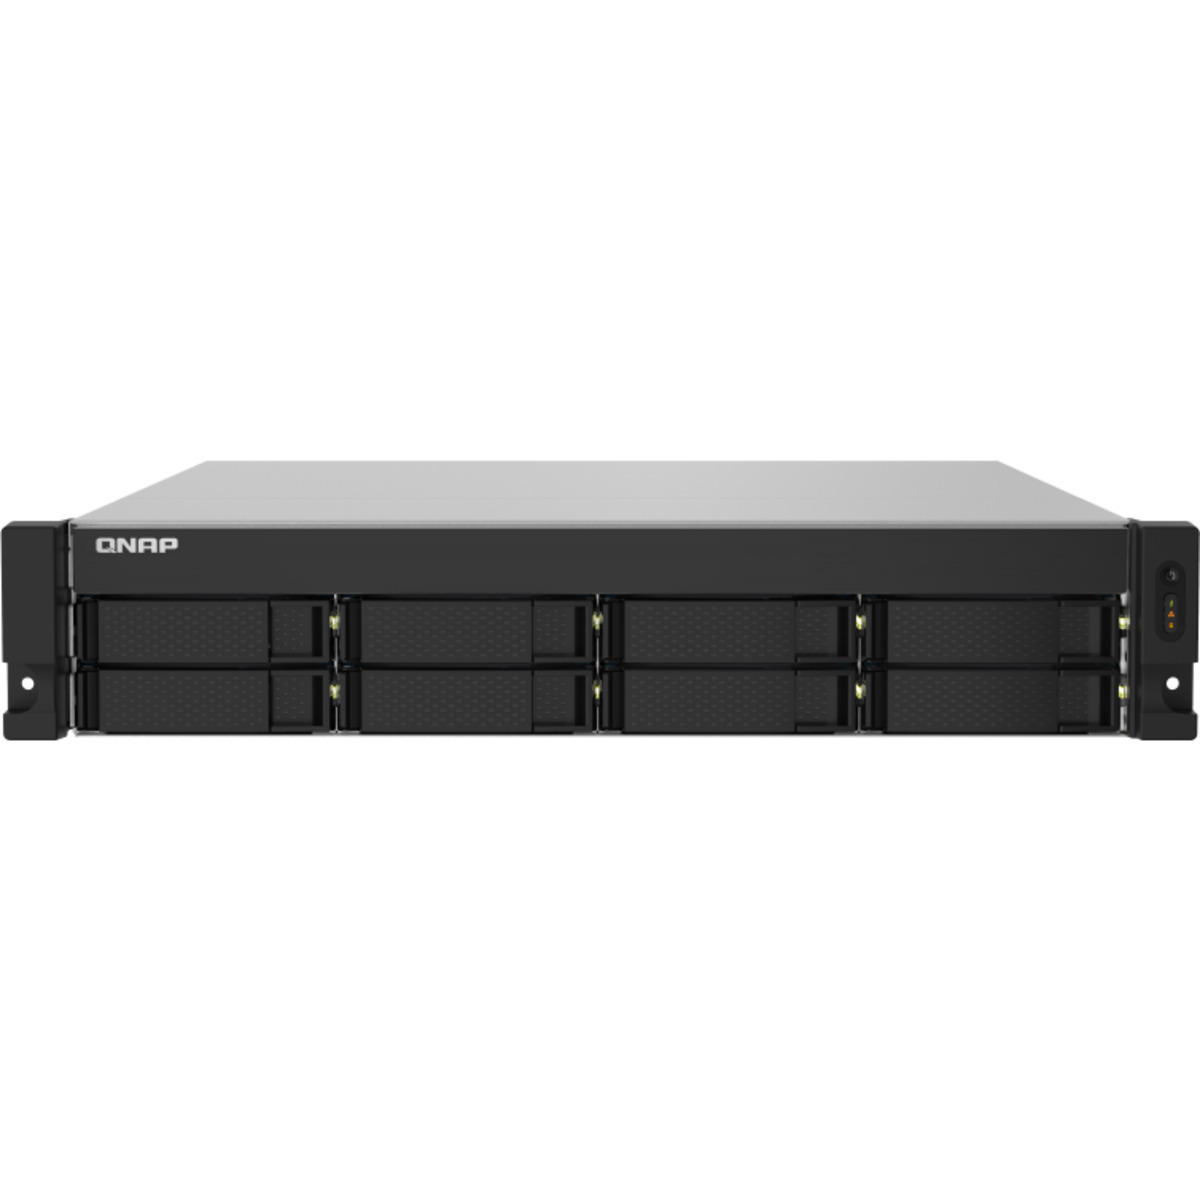 QNAP TS-832PXU-RP 84tb 8-Bay RackMount Personal / Basic Home / Small Office NAS - Network Attached Storage Device 6x14tb Seagate IronWolf Pro ST14000NT001 3.5 7200rpm SATA 6Gb/s HDD NAS Class Drives Installed - Burn-In Tested - FREE RAM UPGRADE TS-832PXU-RP